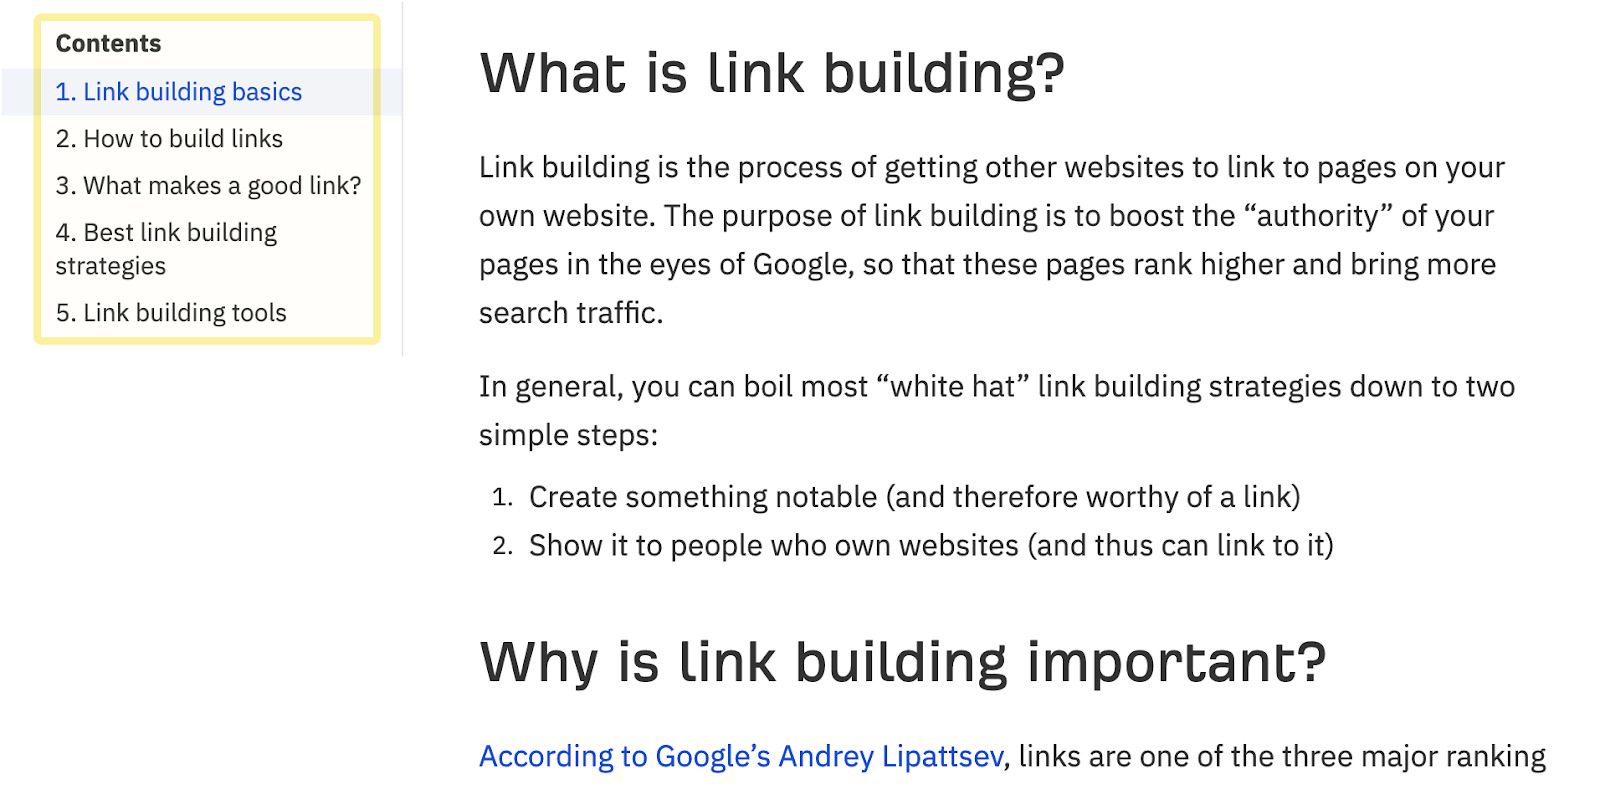 Excerpt of Ahrefs' link building blog post; clickable ToC on the left 